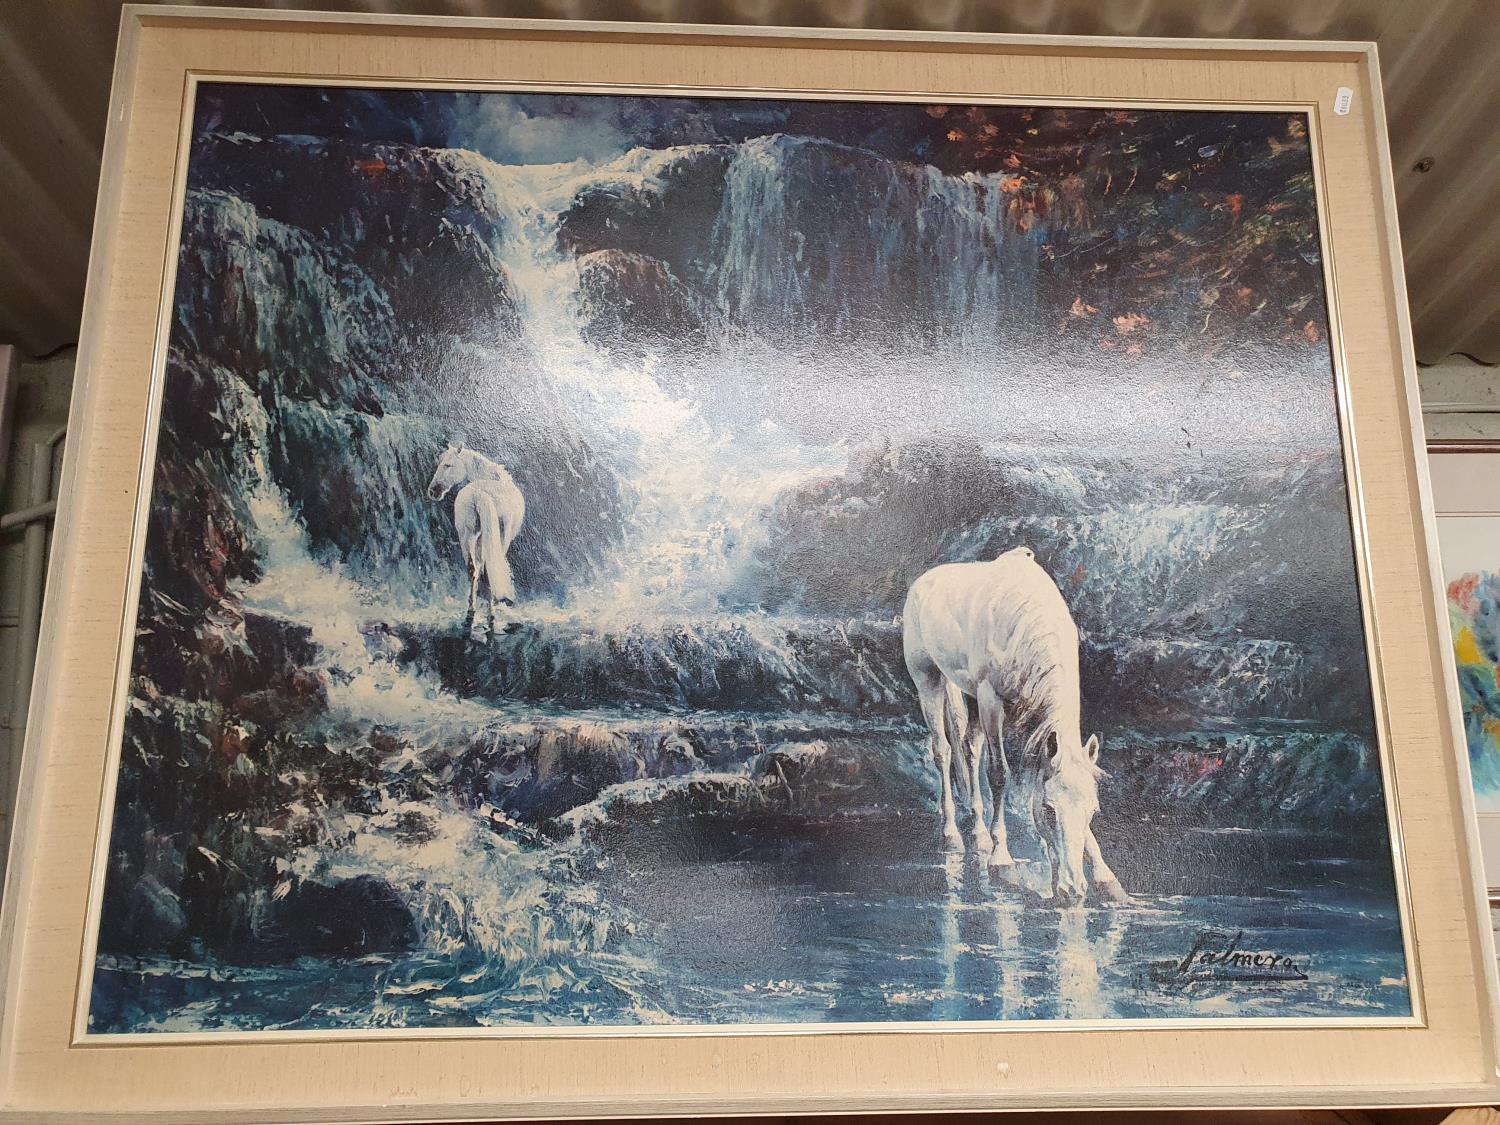 Two large Photographic Prints on Canvas along with a large coloured print of horse at a waterfall. - Image 2 of 2